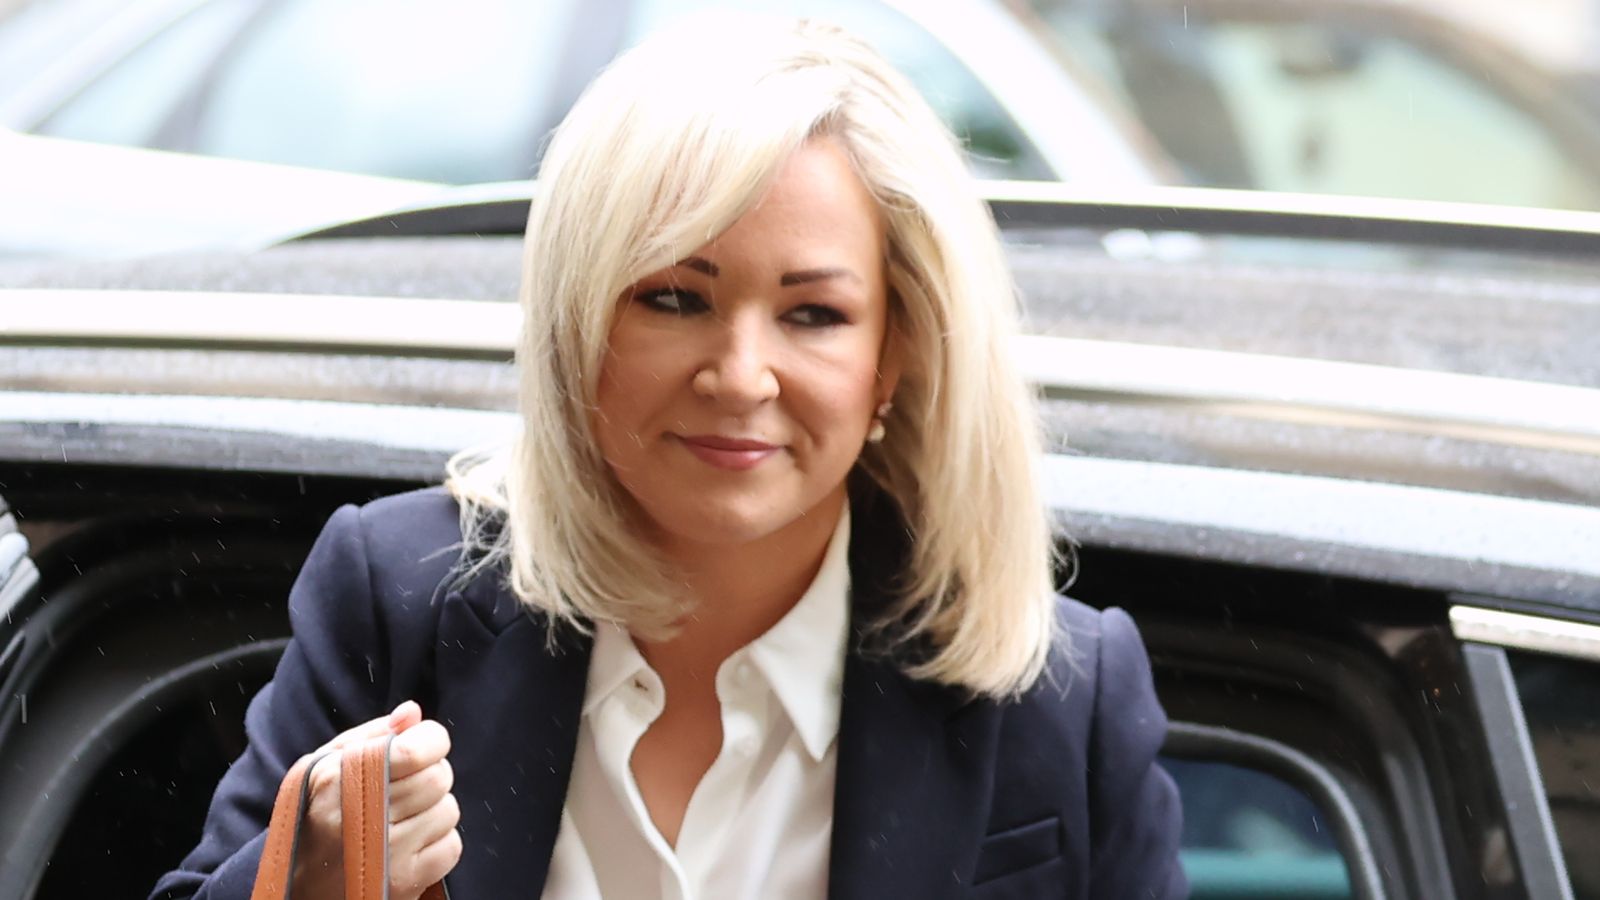 Northern Ireland First Minister Michelle O'Neill apologises for going to ex-IRA member's funeral during COVID